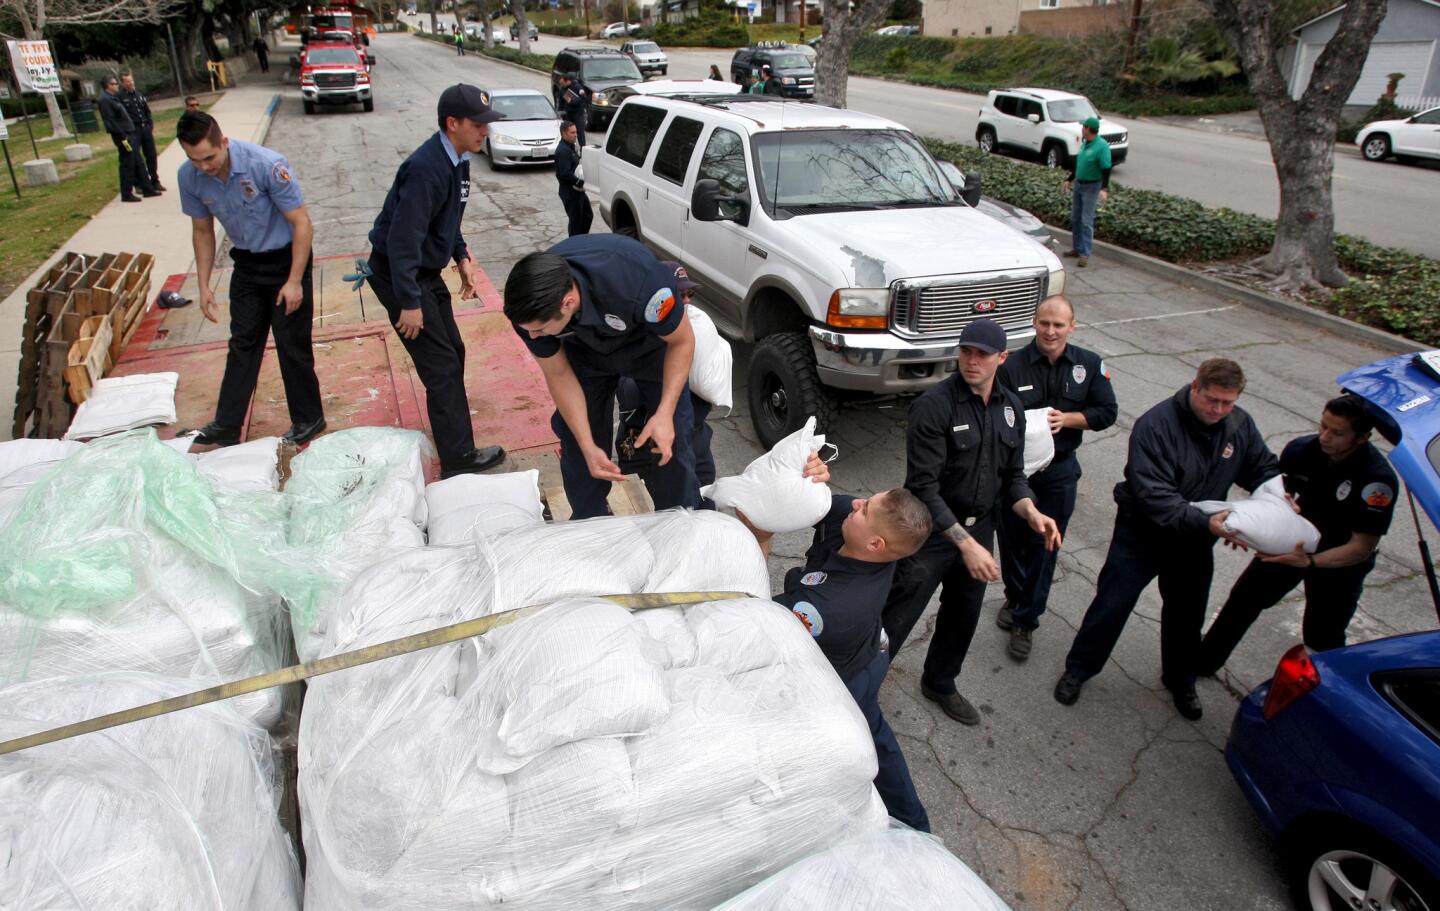 Los Angeles County Fire Dept. personnel from Camp Crew 2 and 9 and LA Co. La Cañada fire station 19 helped distribute 1,000 pre-filled sandbags to local residents at Two Strike Park in La Crescenta on Saturday, Jan. 23, 2016. The firefighters also filled an additional 2,000 sandbags with sand brought in from the Antelope Valley. Anyone needed additional sandbags can pick up more at their local fire department.